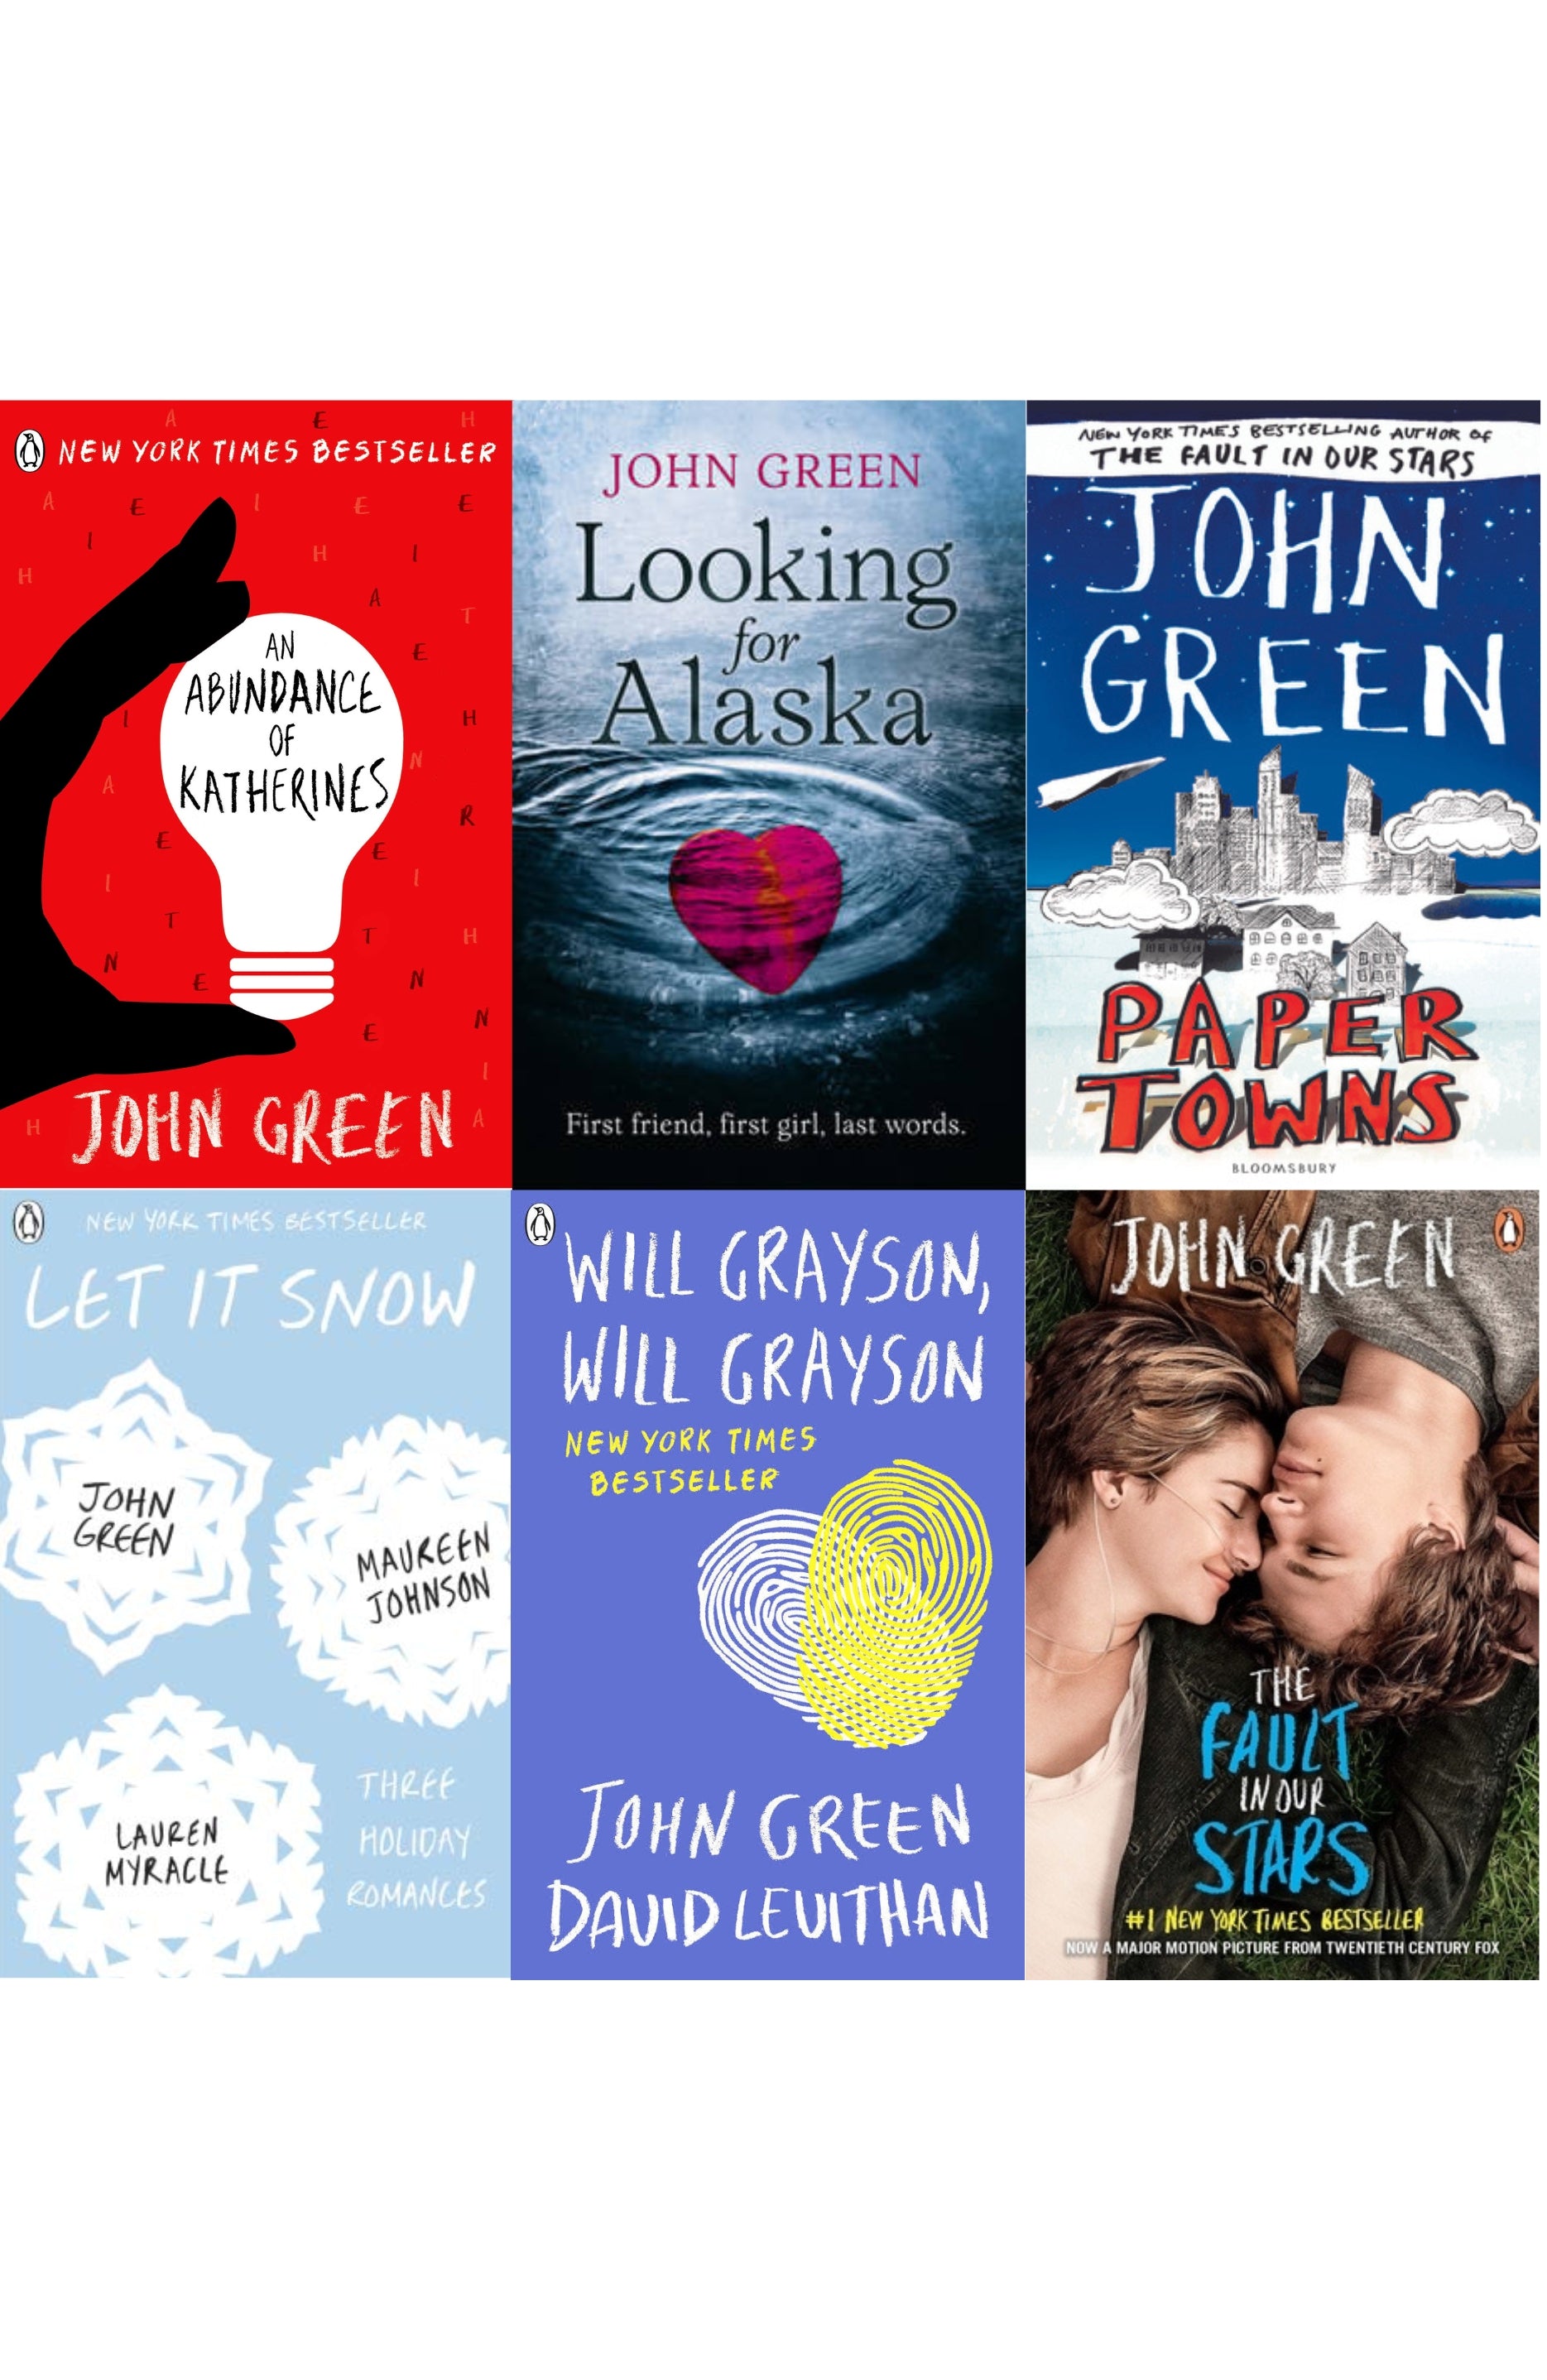 John Green Bestseller Book Combo ( The Fault in Our Stars, Paper Towns, Let It Snow, Looking for Alaska, An Abundance of Katherines, Will Grayson, Will Grayson )